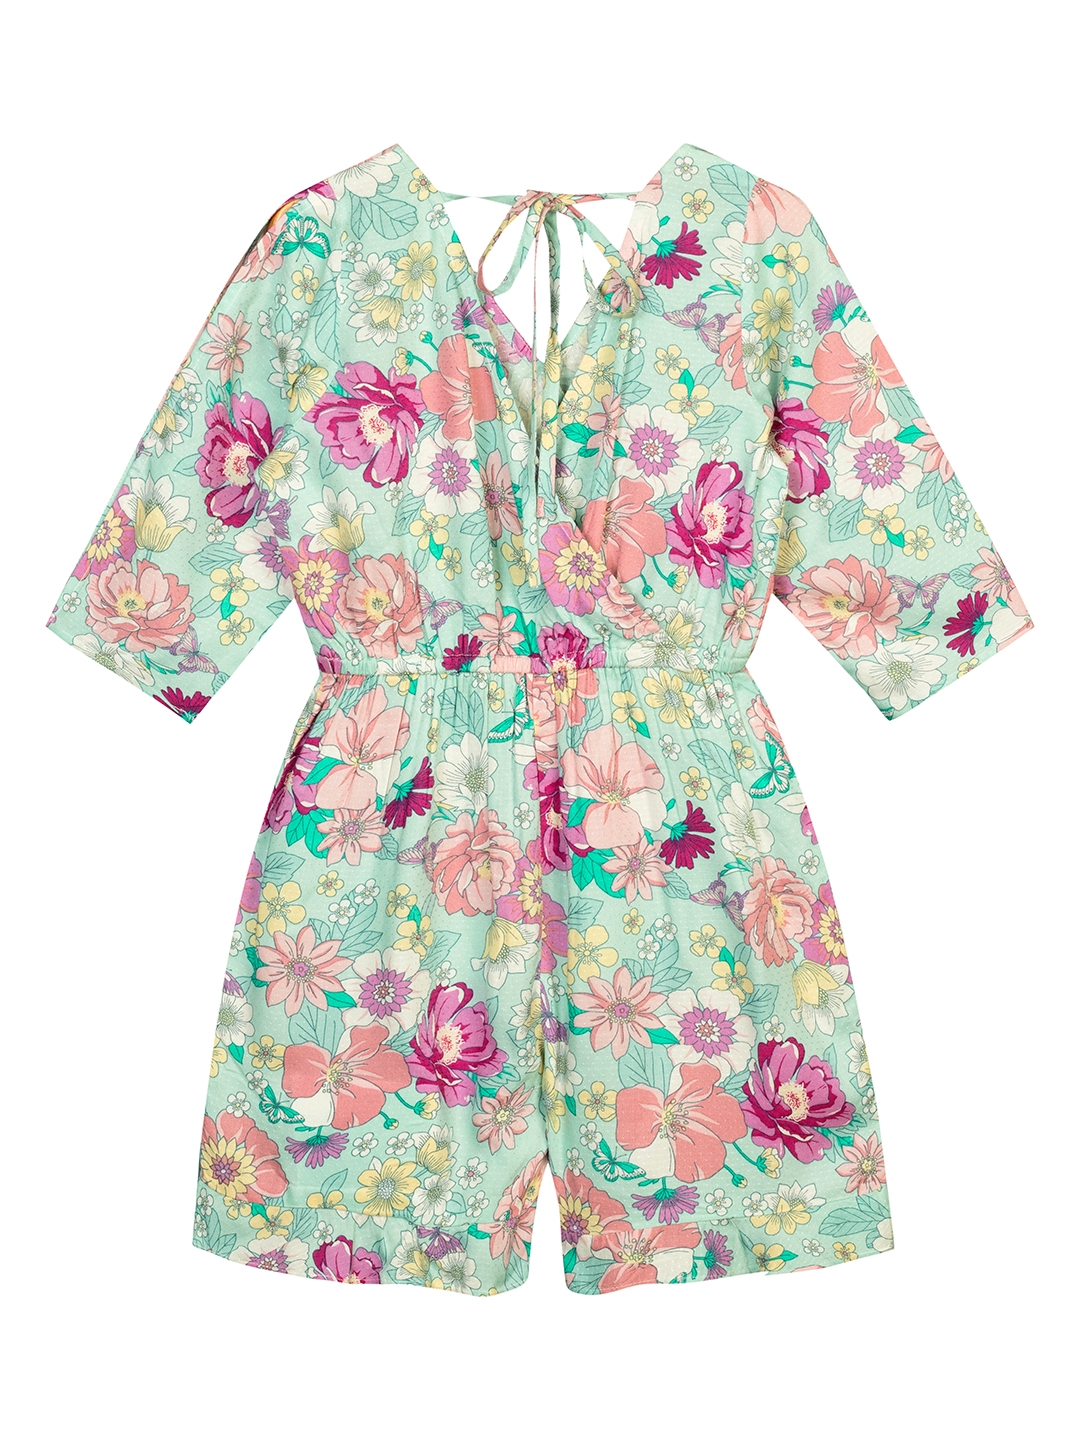 Budding Bees | Budding Bees Girls Blue Floral Playsuit 1